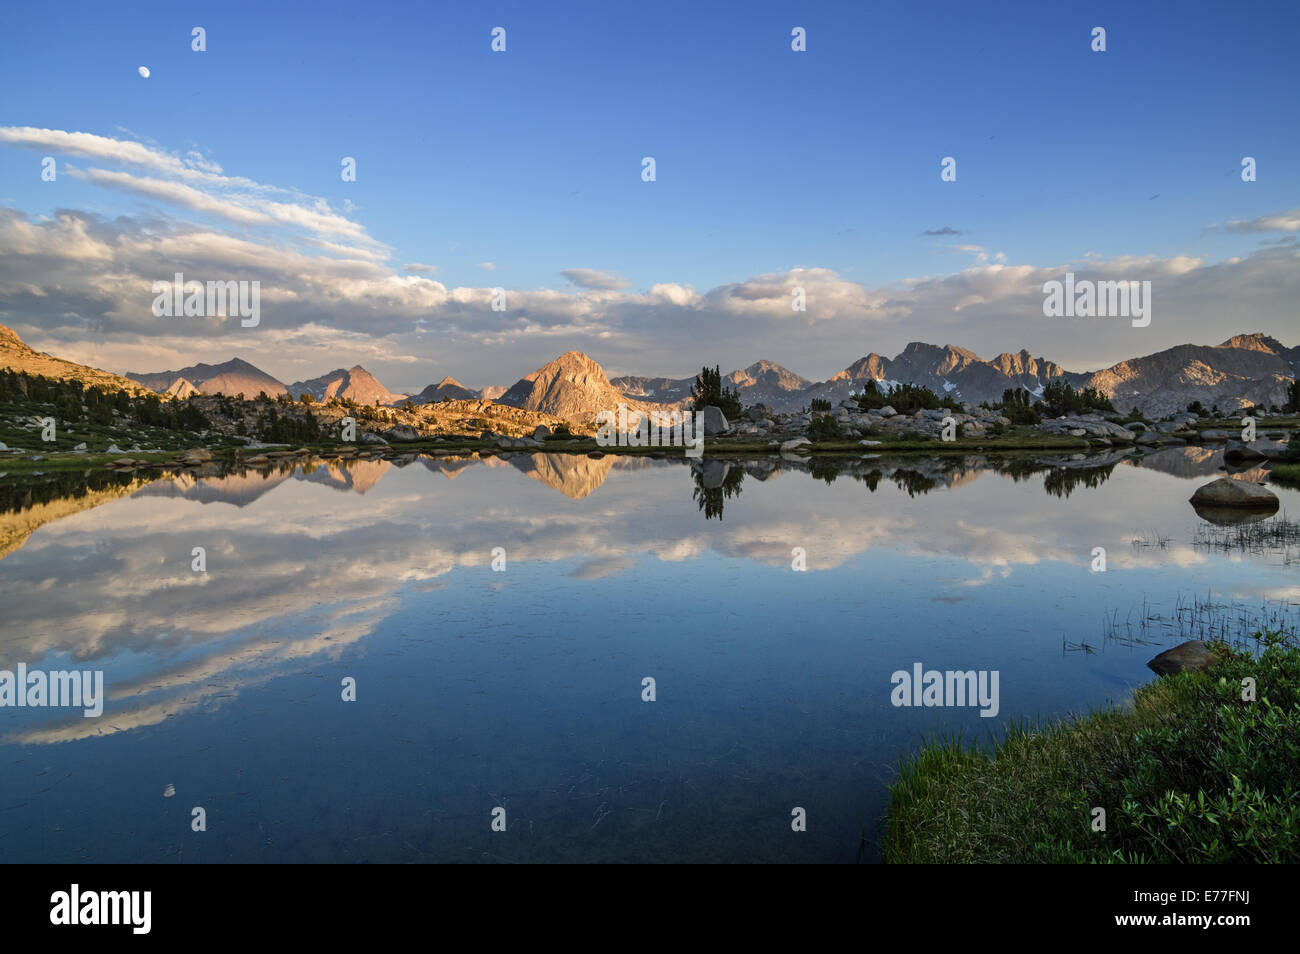 evening reflection of the Hermit and other mountains in a Sierra Nevada mountain lake Stock Photo